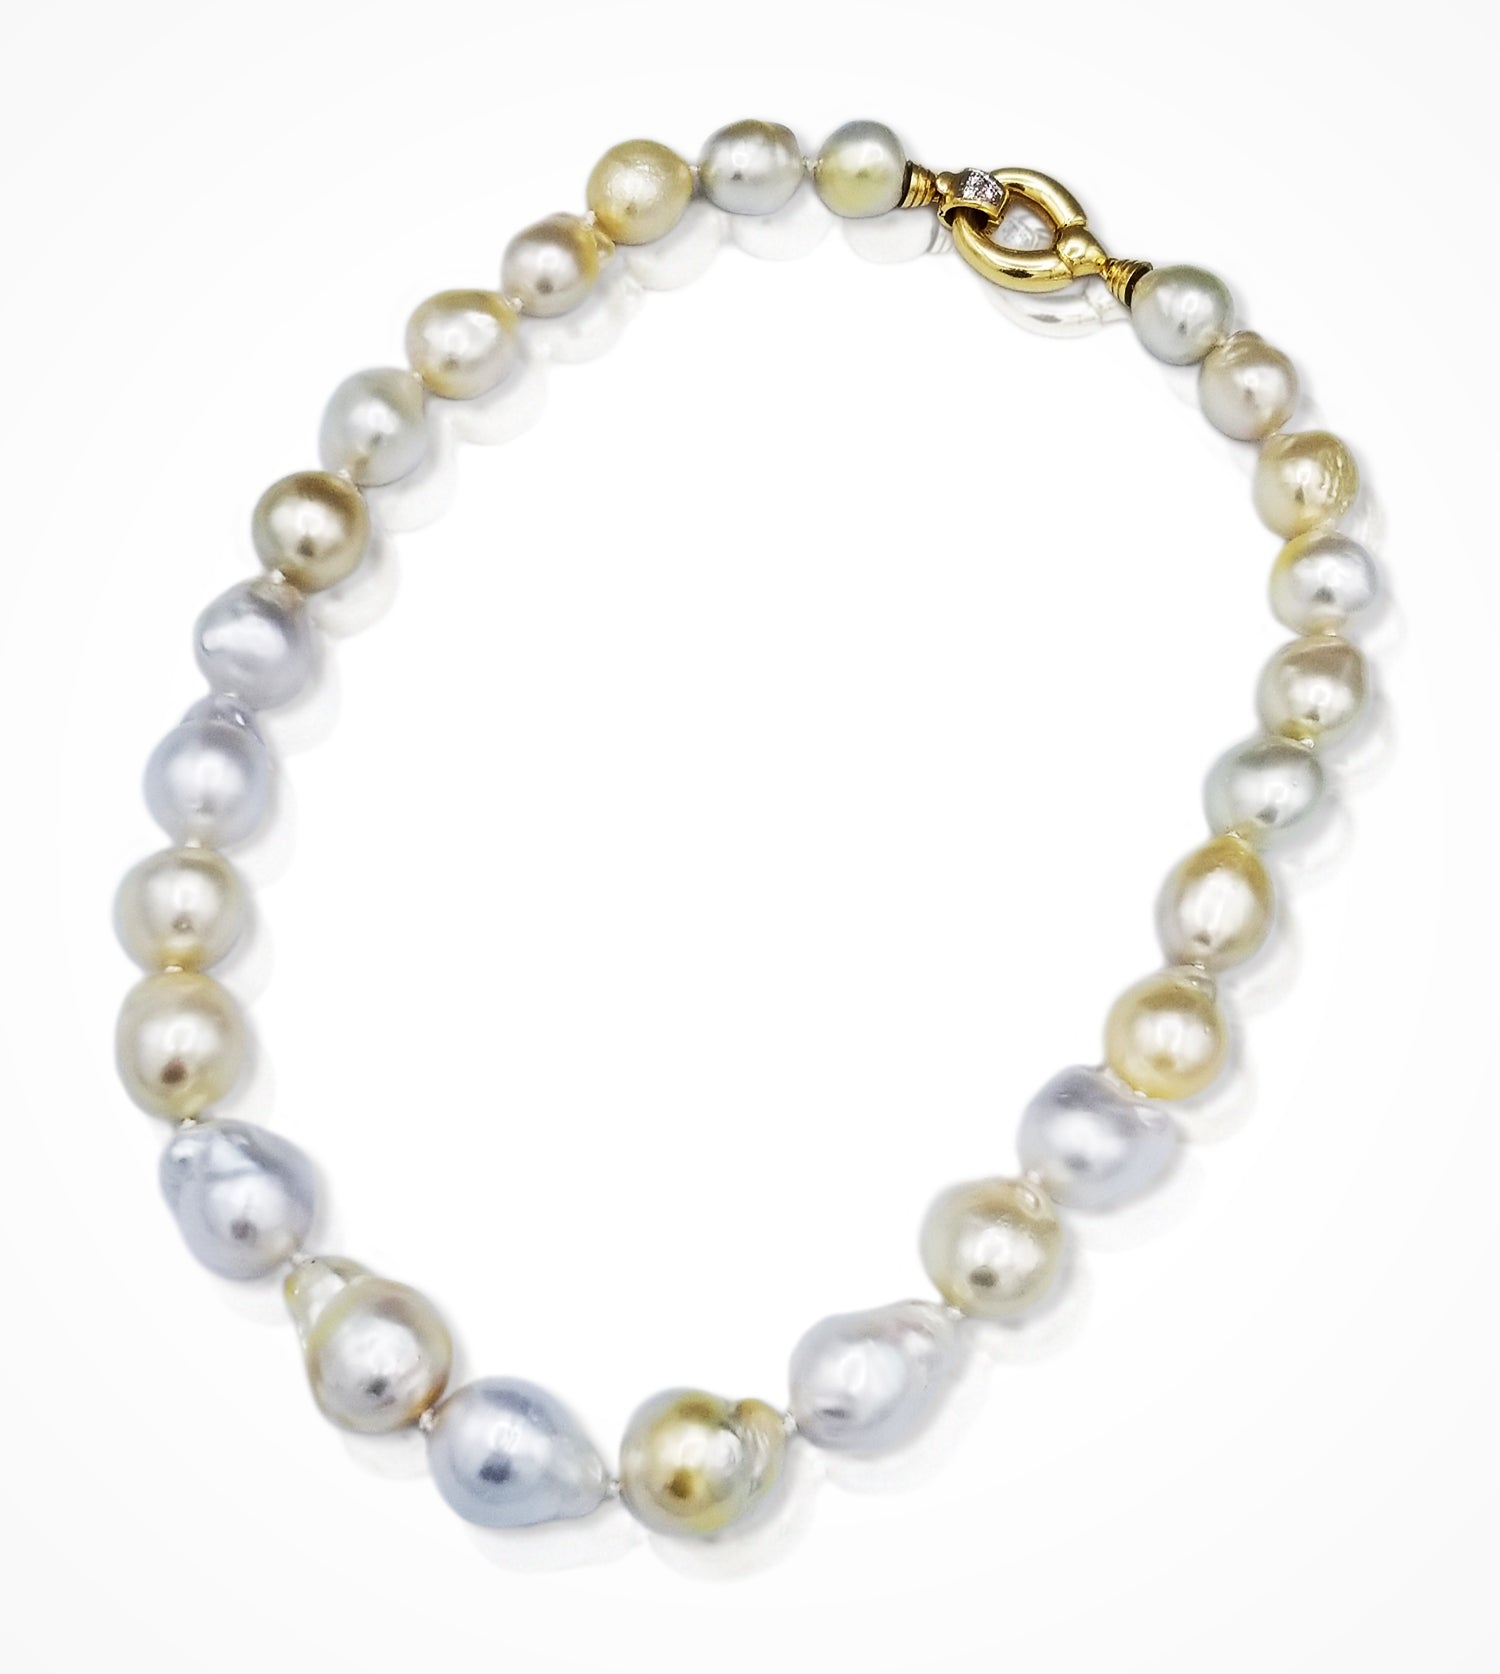 NE-000611 26 natural colour silver and gold baroque South Sea pearls, 10.8-14.5mm Price upon request and MC-000909 18K yellow gold clasp $1150.00